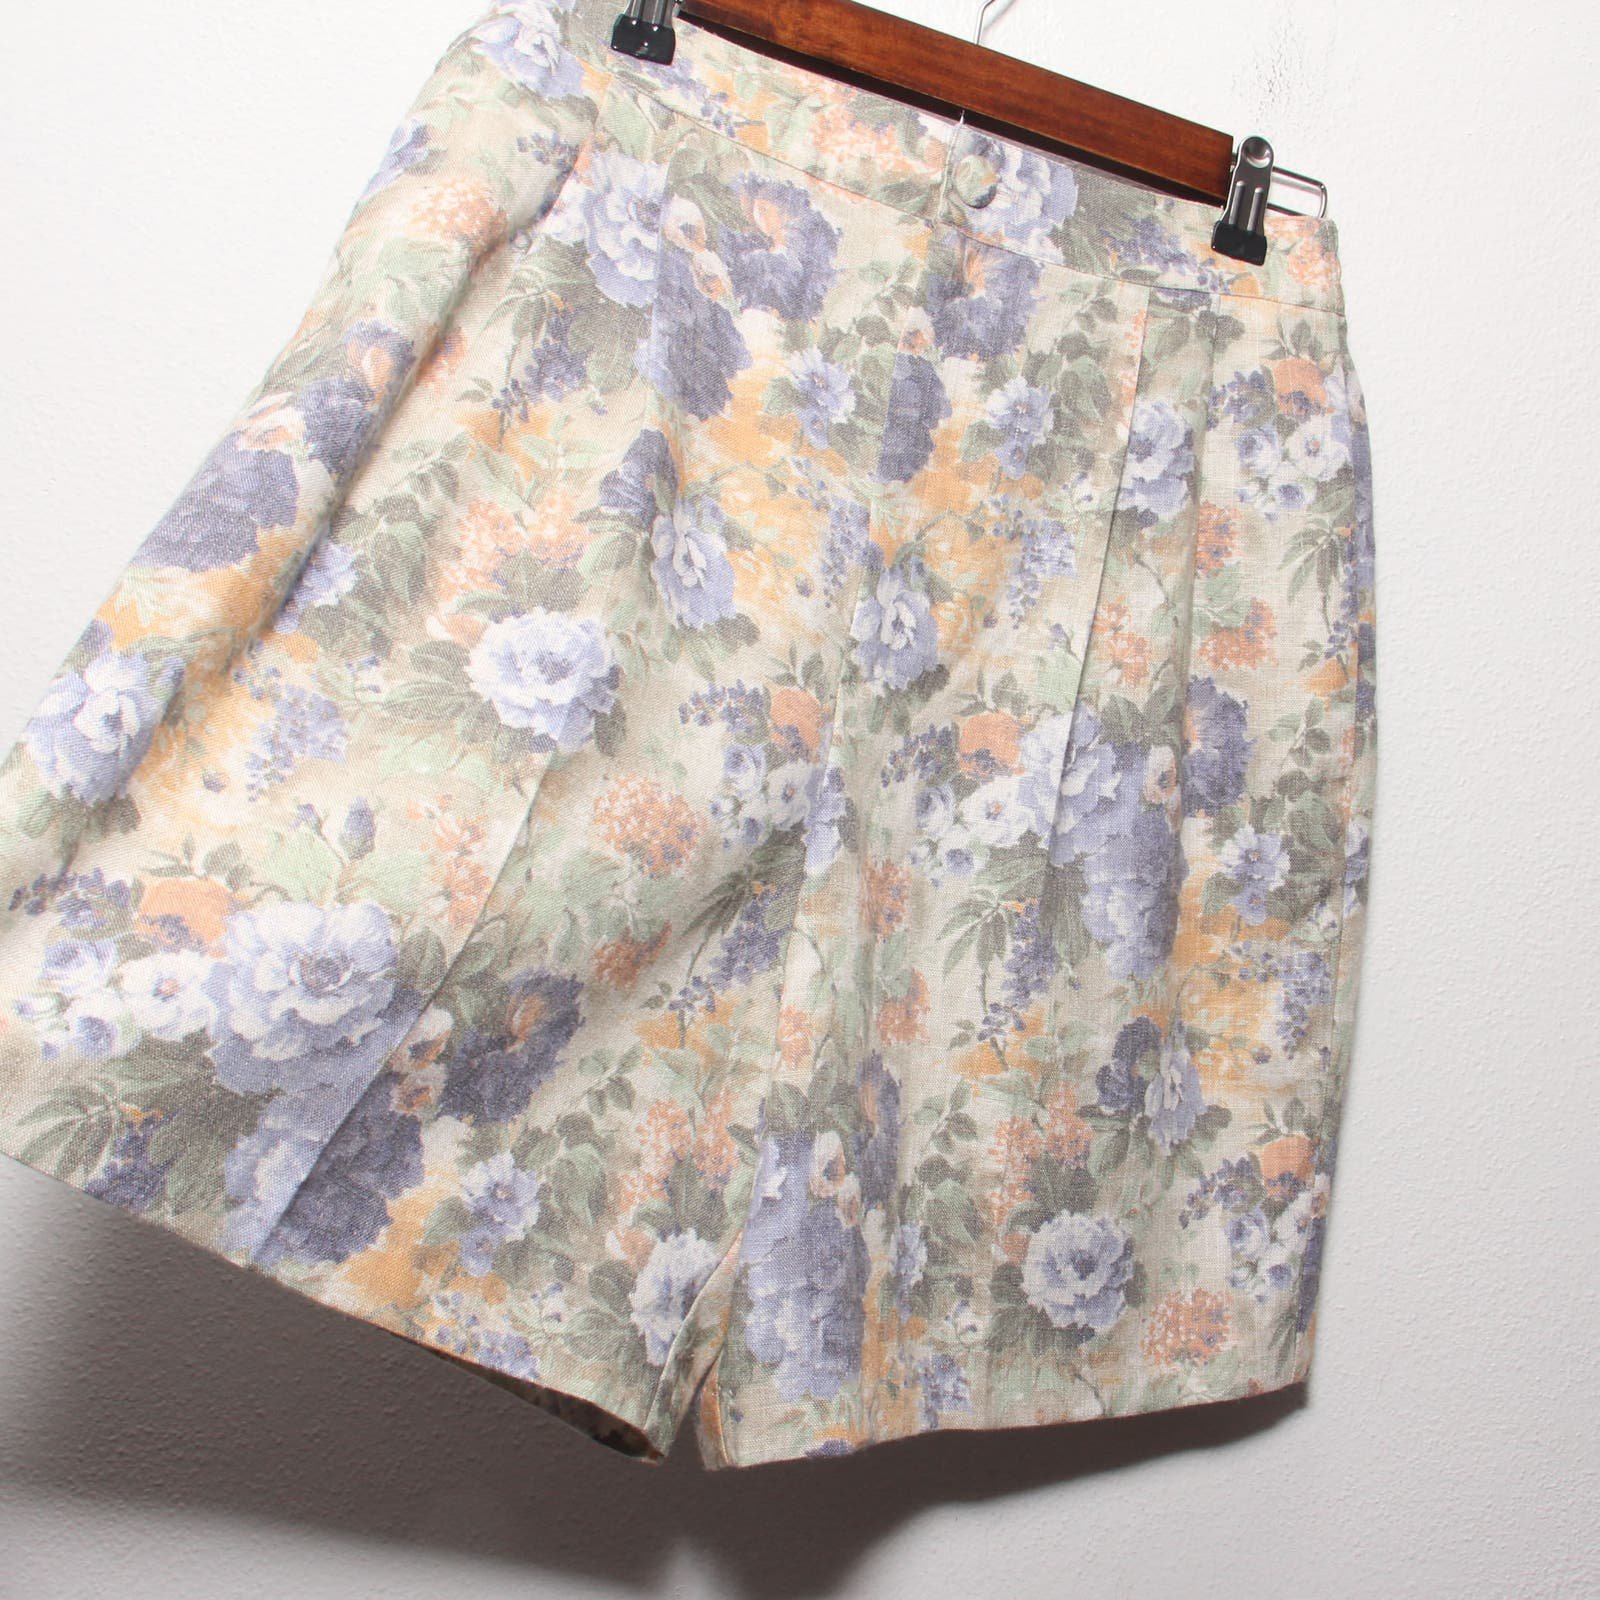 save up to 70% Vintage Fundamental Things Floral High waist culottes wide leg shorts Size 10P ItHvnorNg Everyday Low Prices